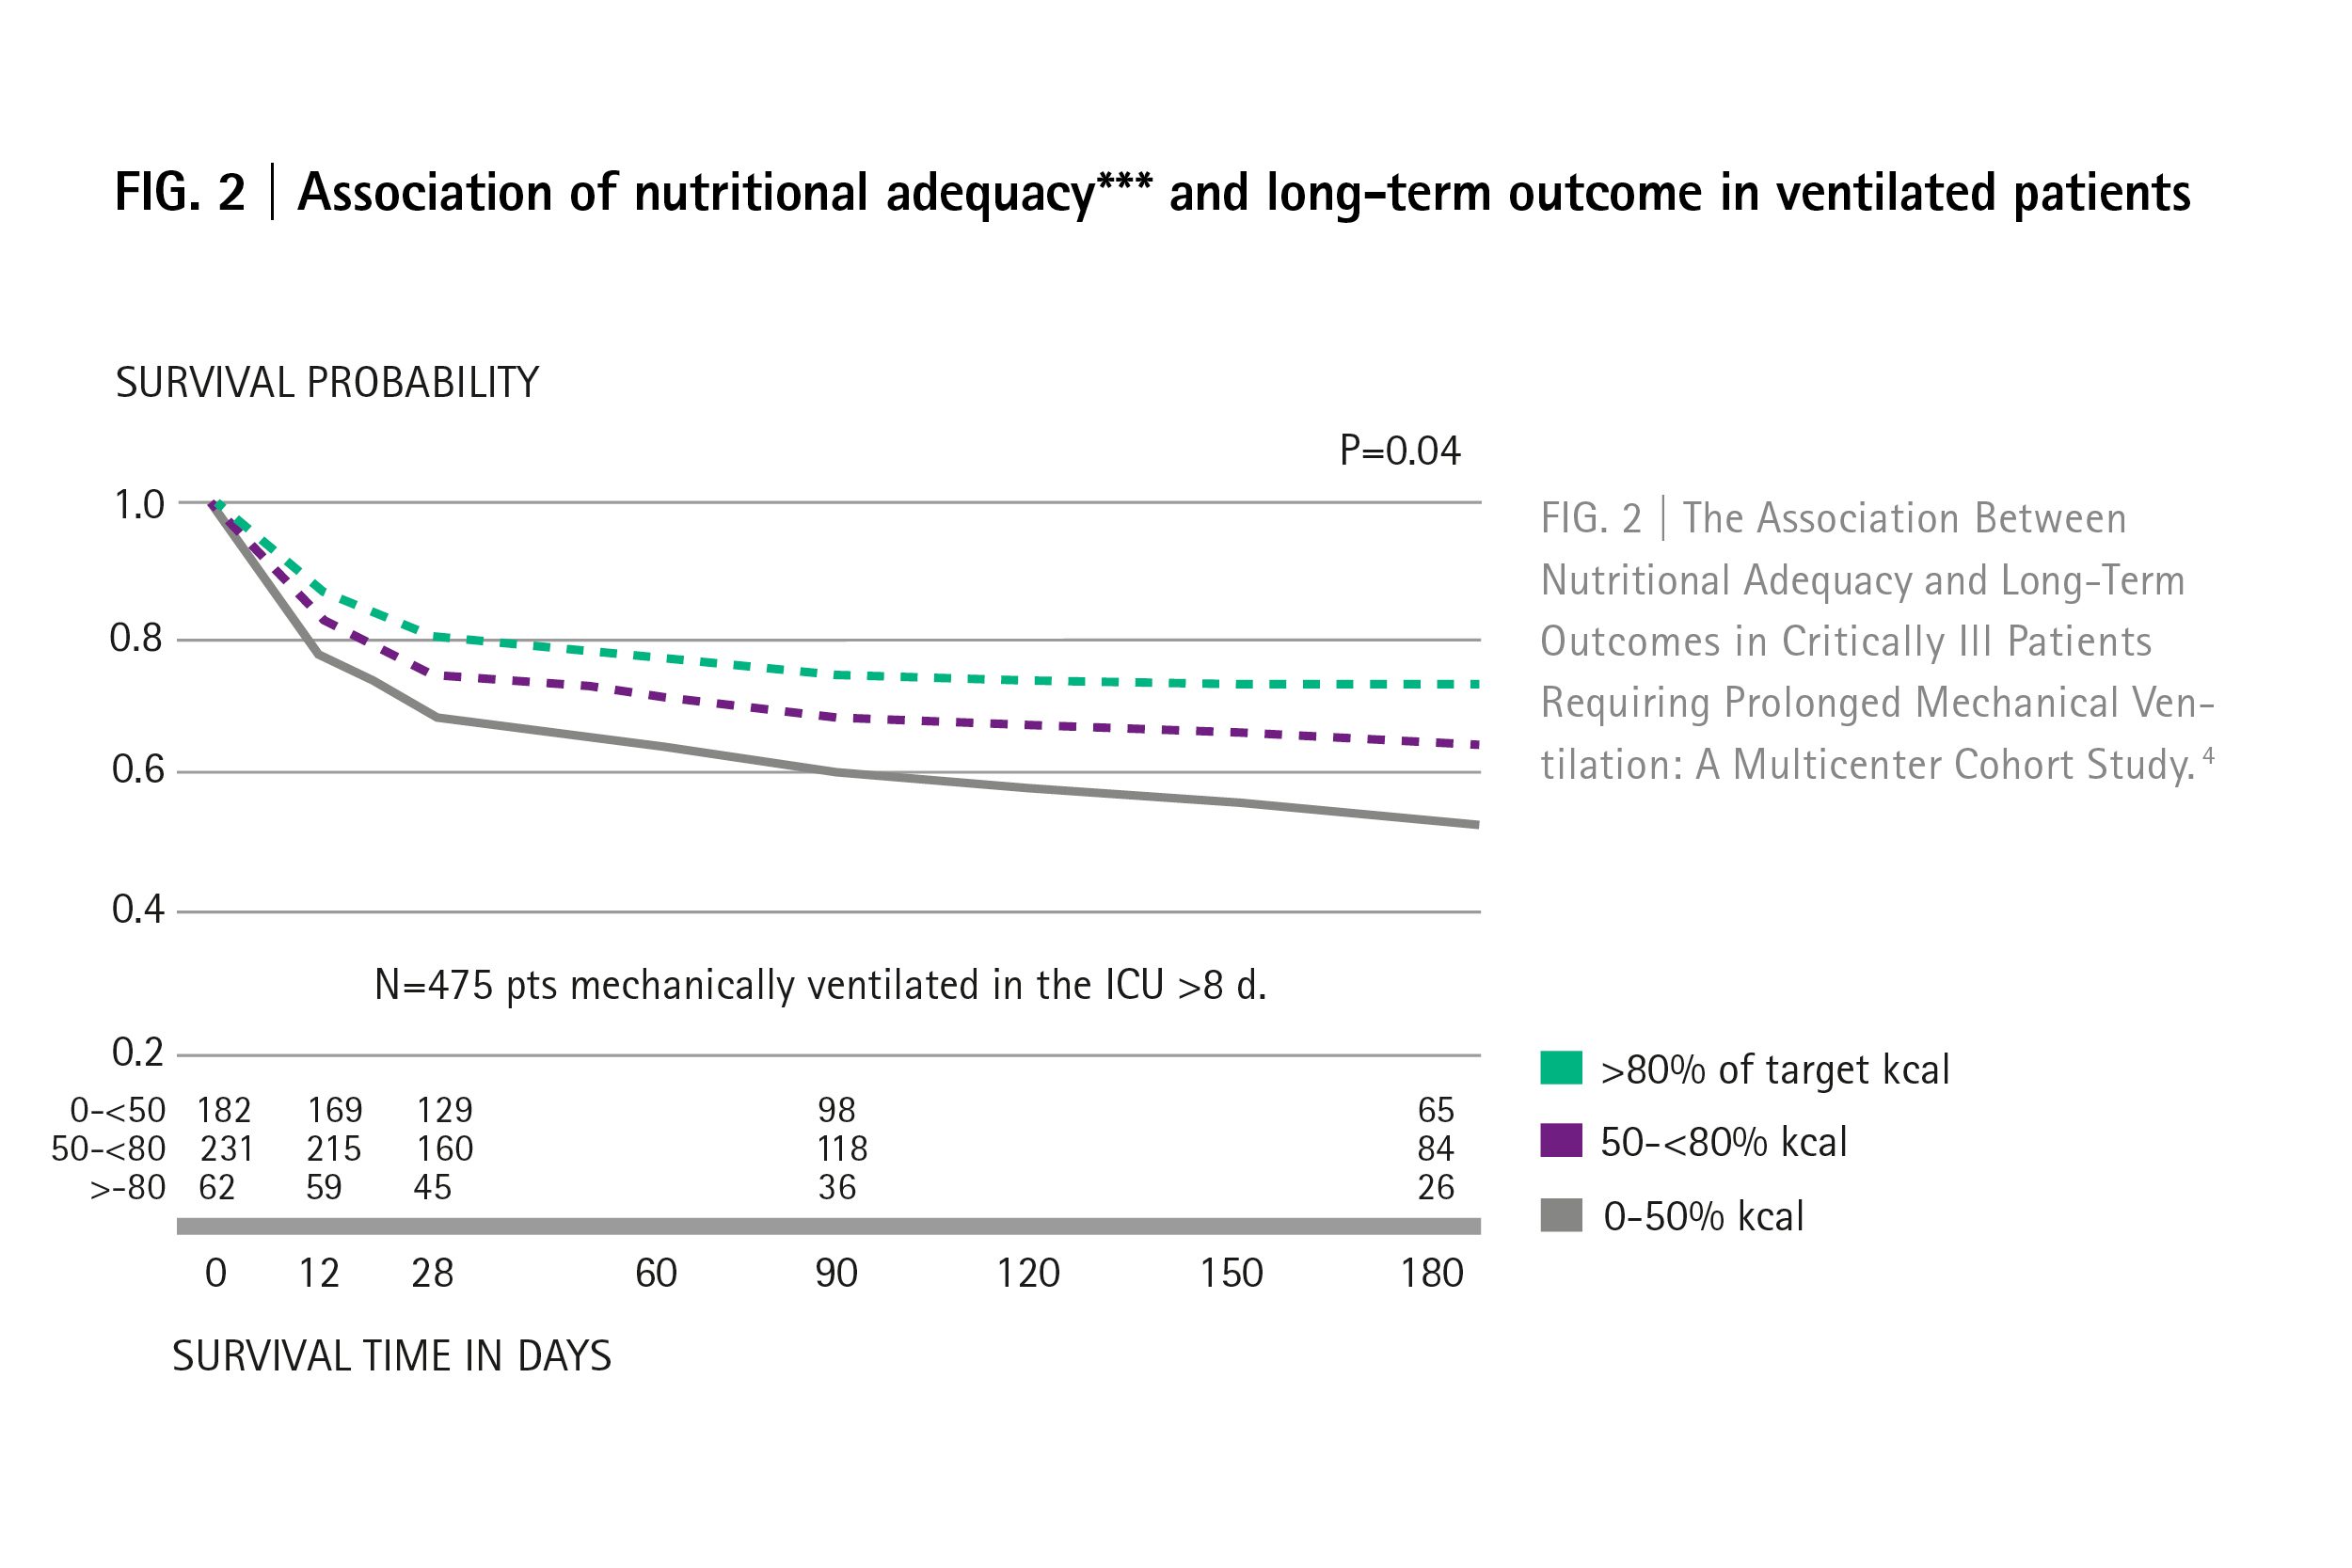 Nutritional adequacy in ventilated patients.